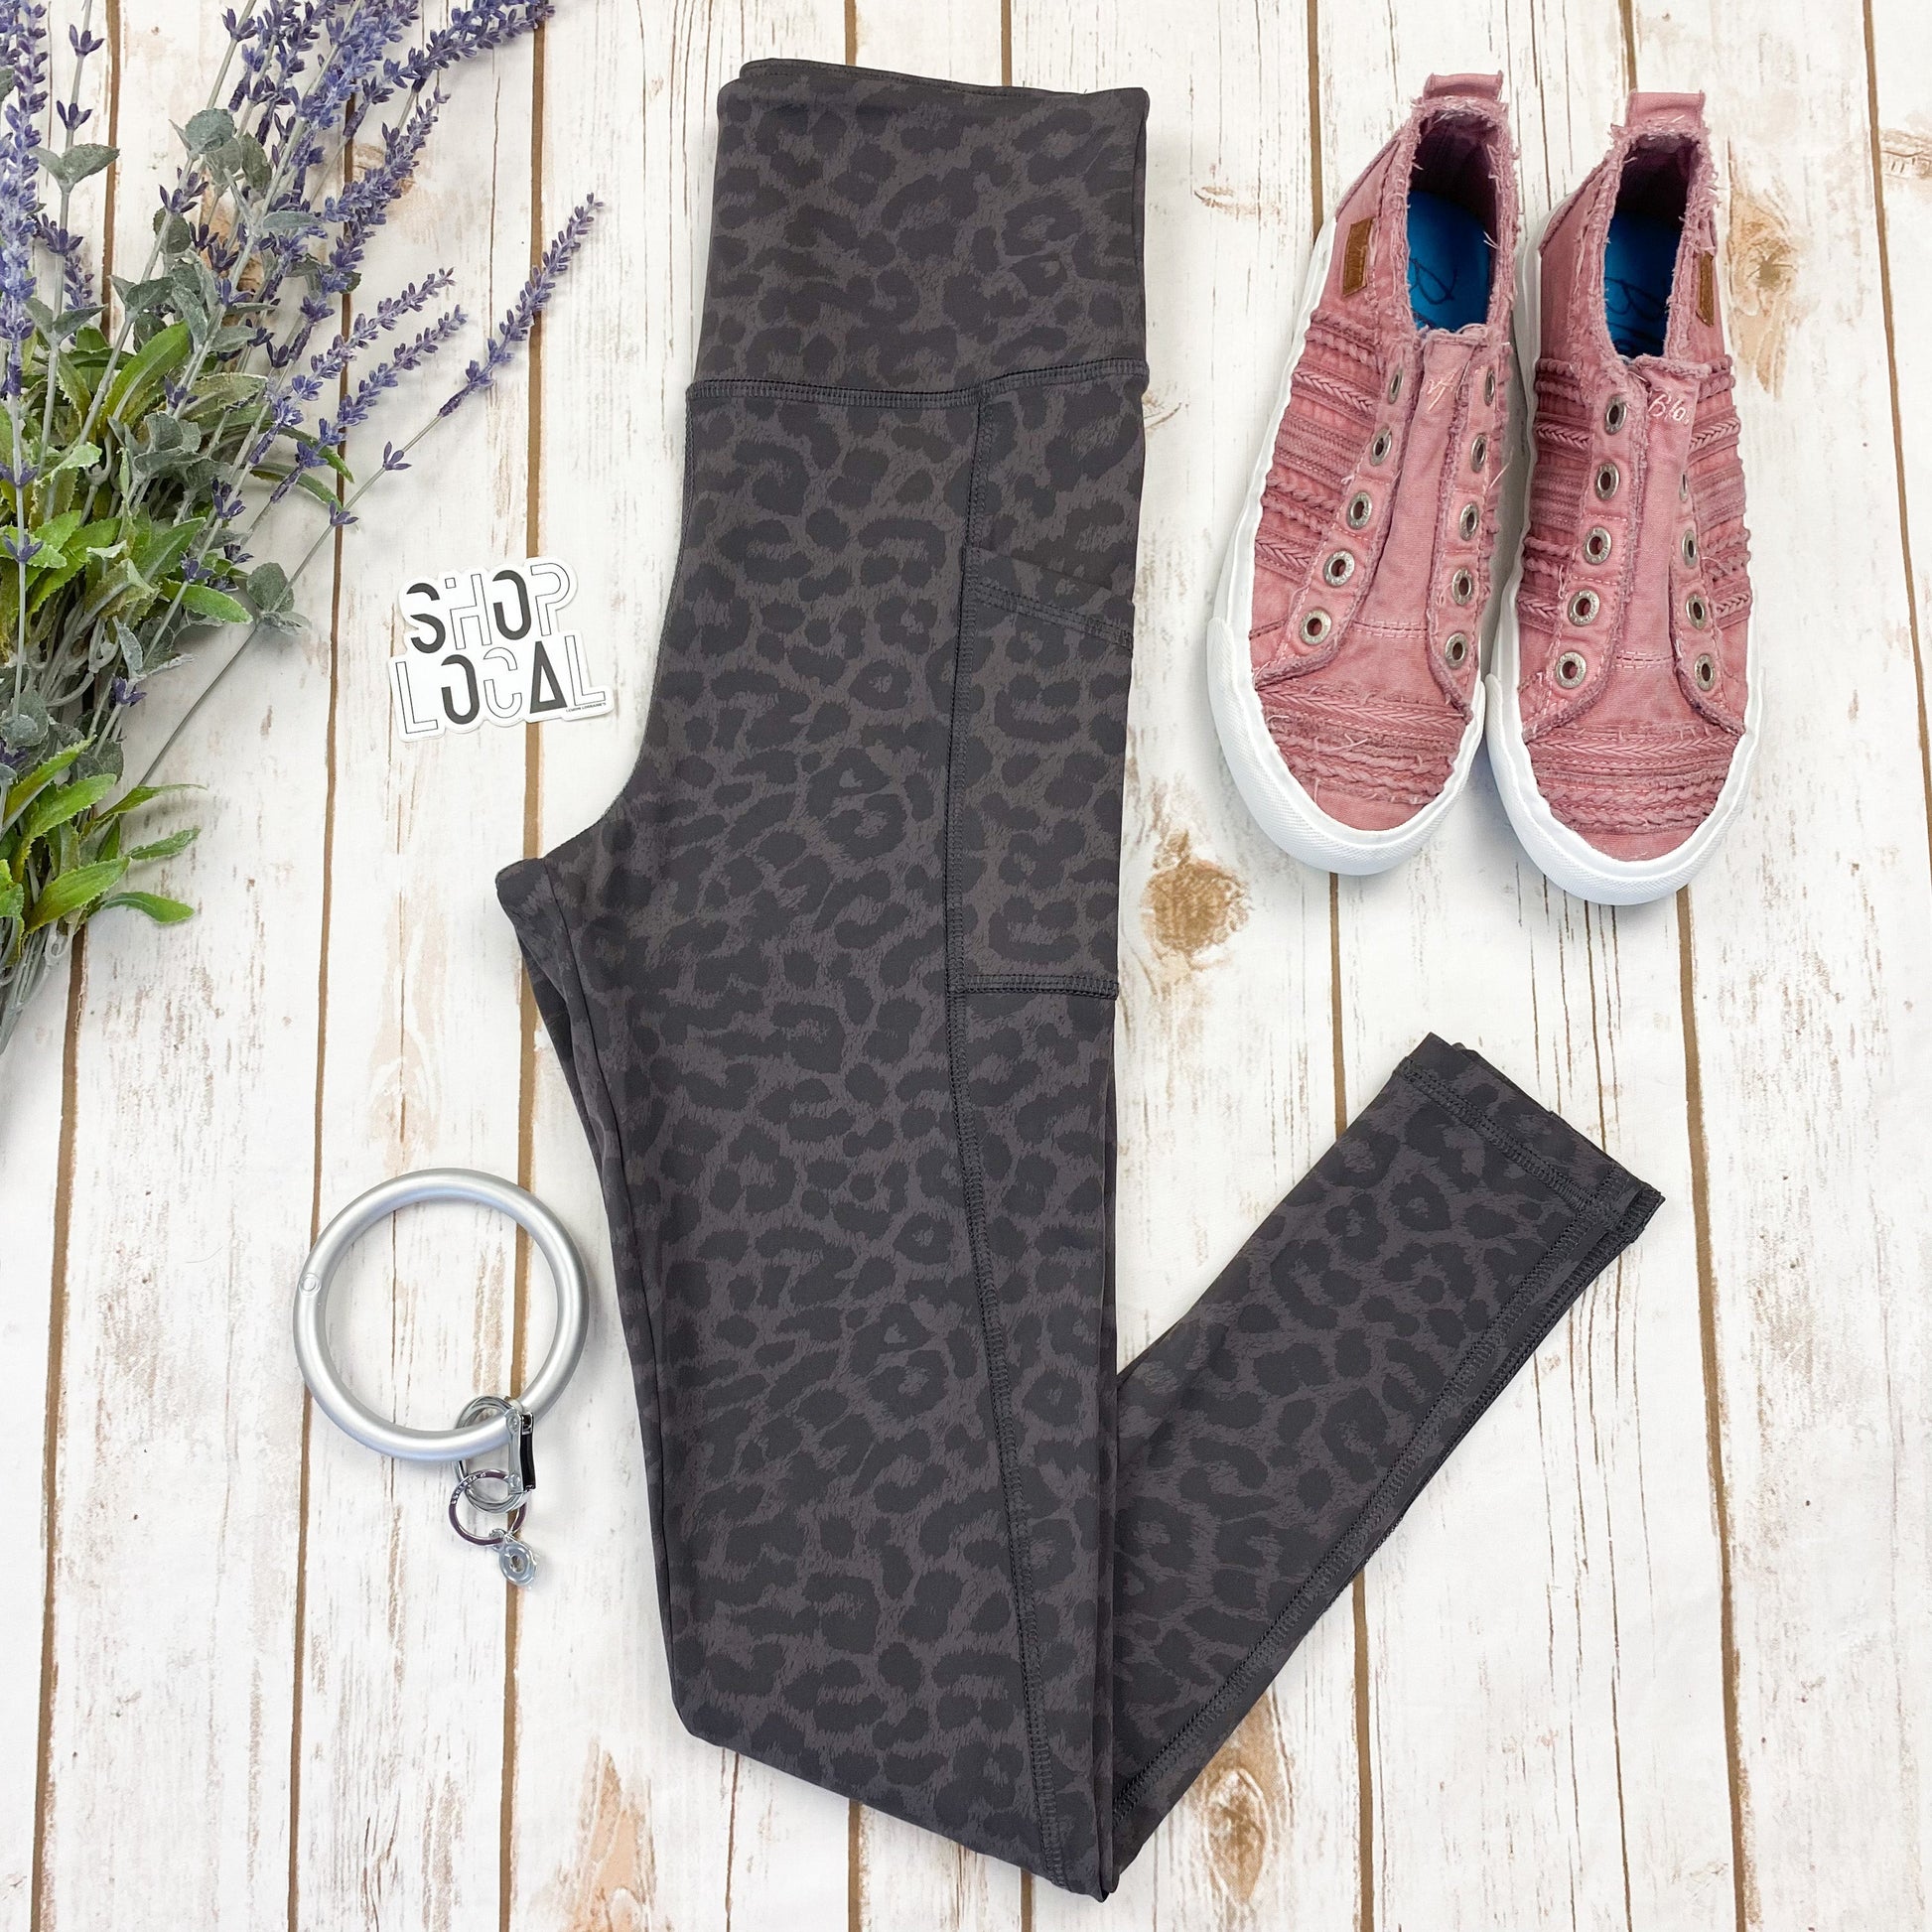 IN STOCK Athleisure Leggings - Charcoal Leopard - AnnRose Boutique